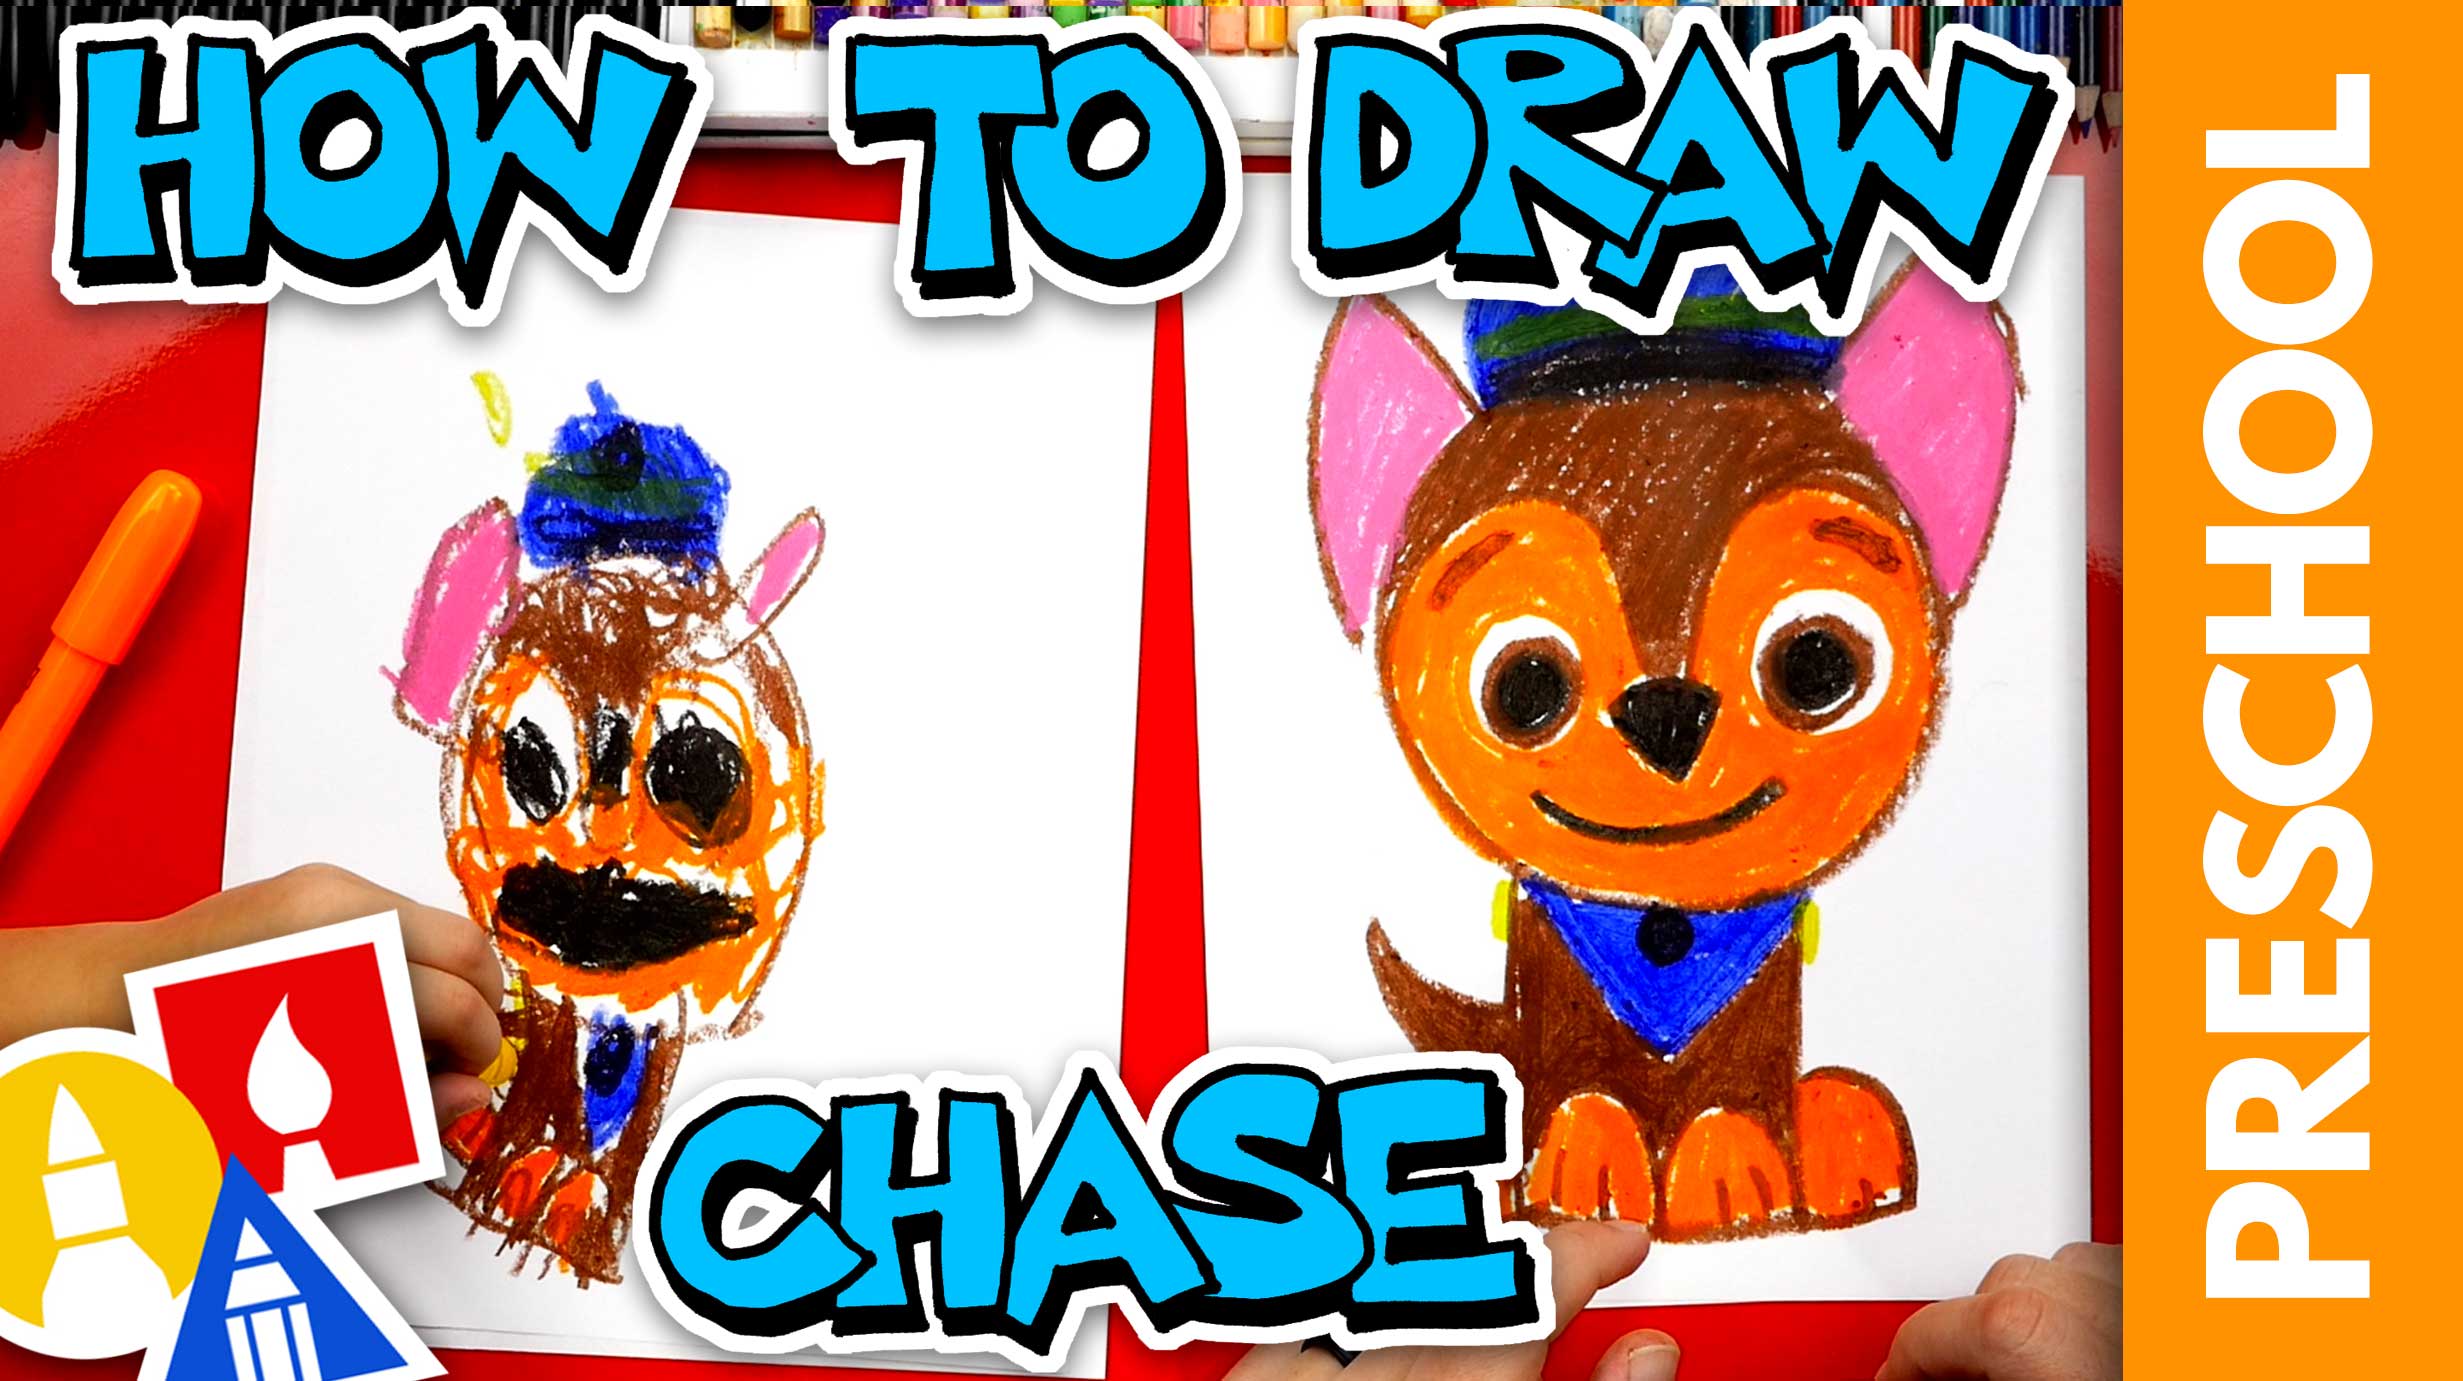 How To Draw Chase From Patrol - Preschool - Art For Kids Hub -